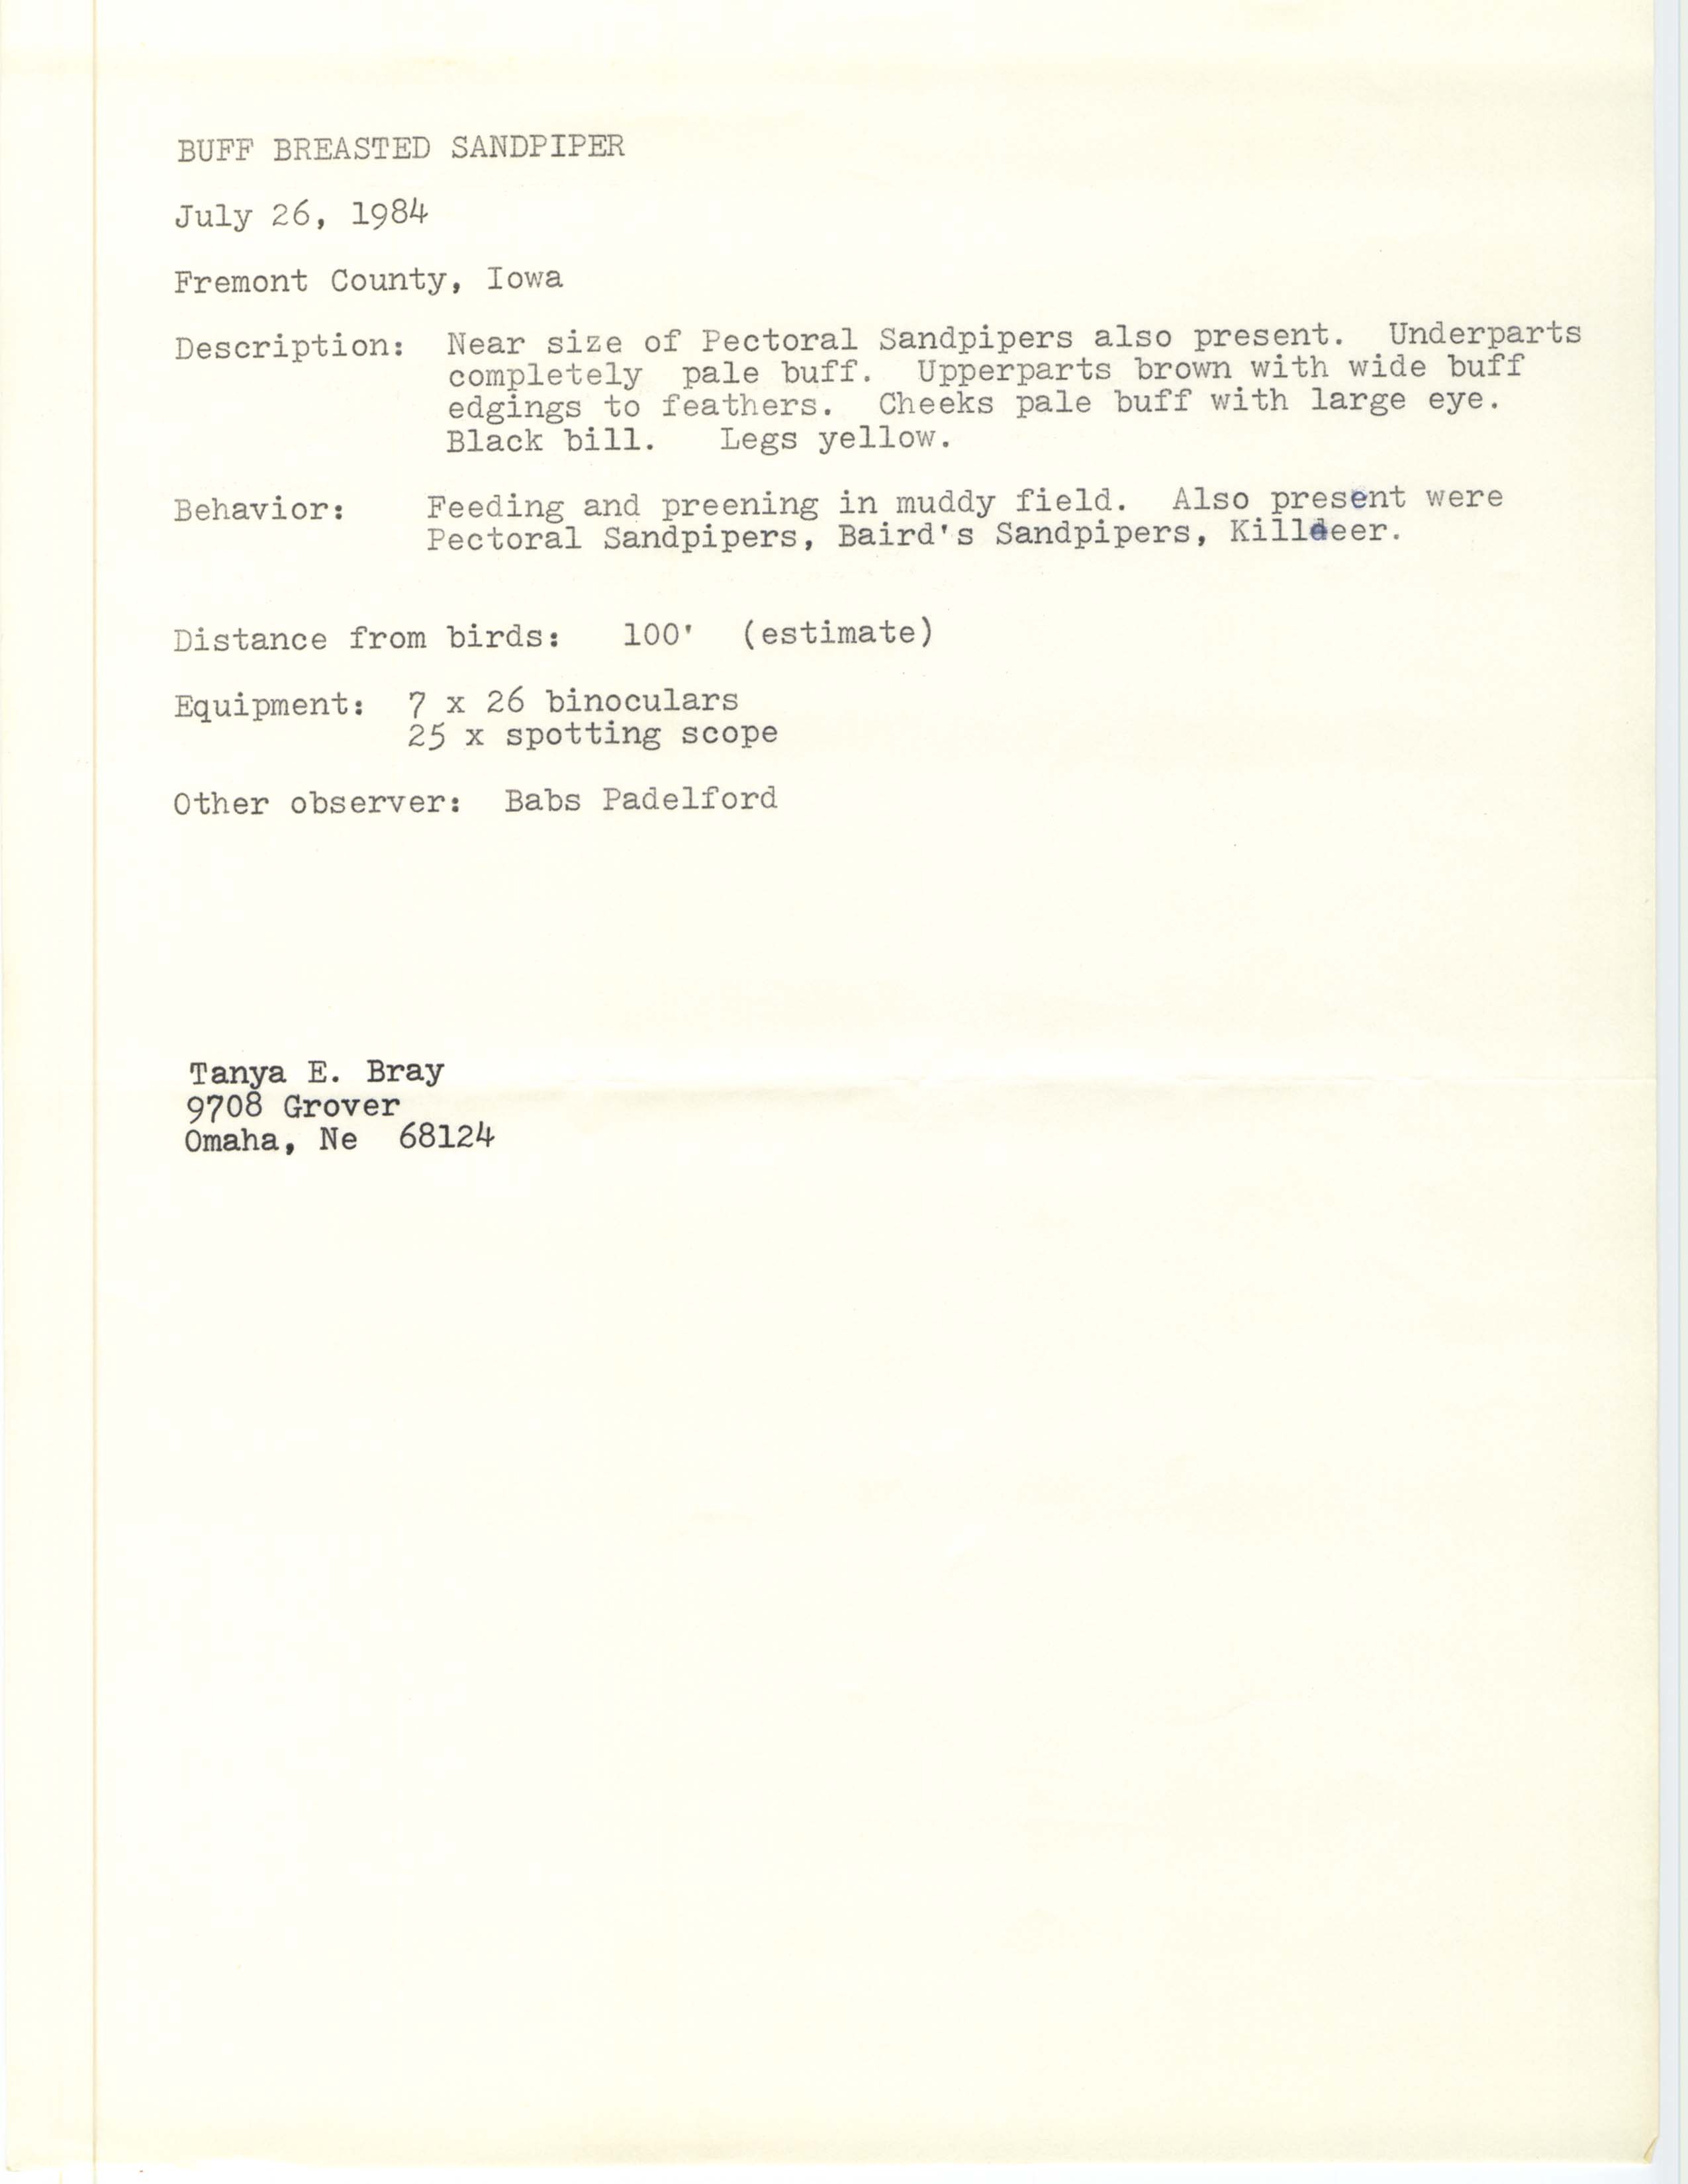 Rare bird documentation form for Buff-breasted Sandpiper at Fremont County, 1984